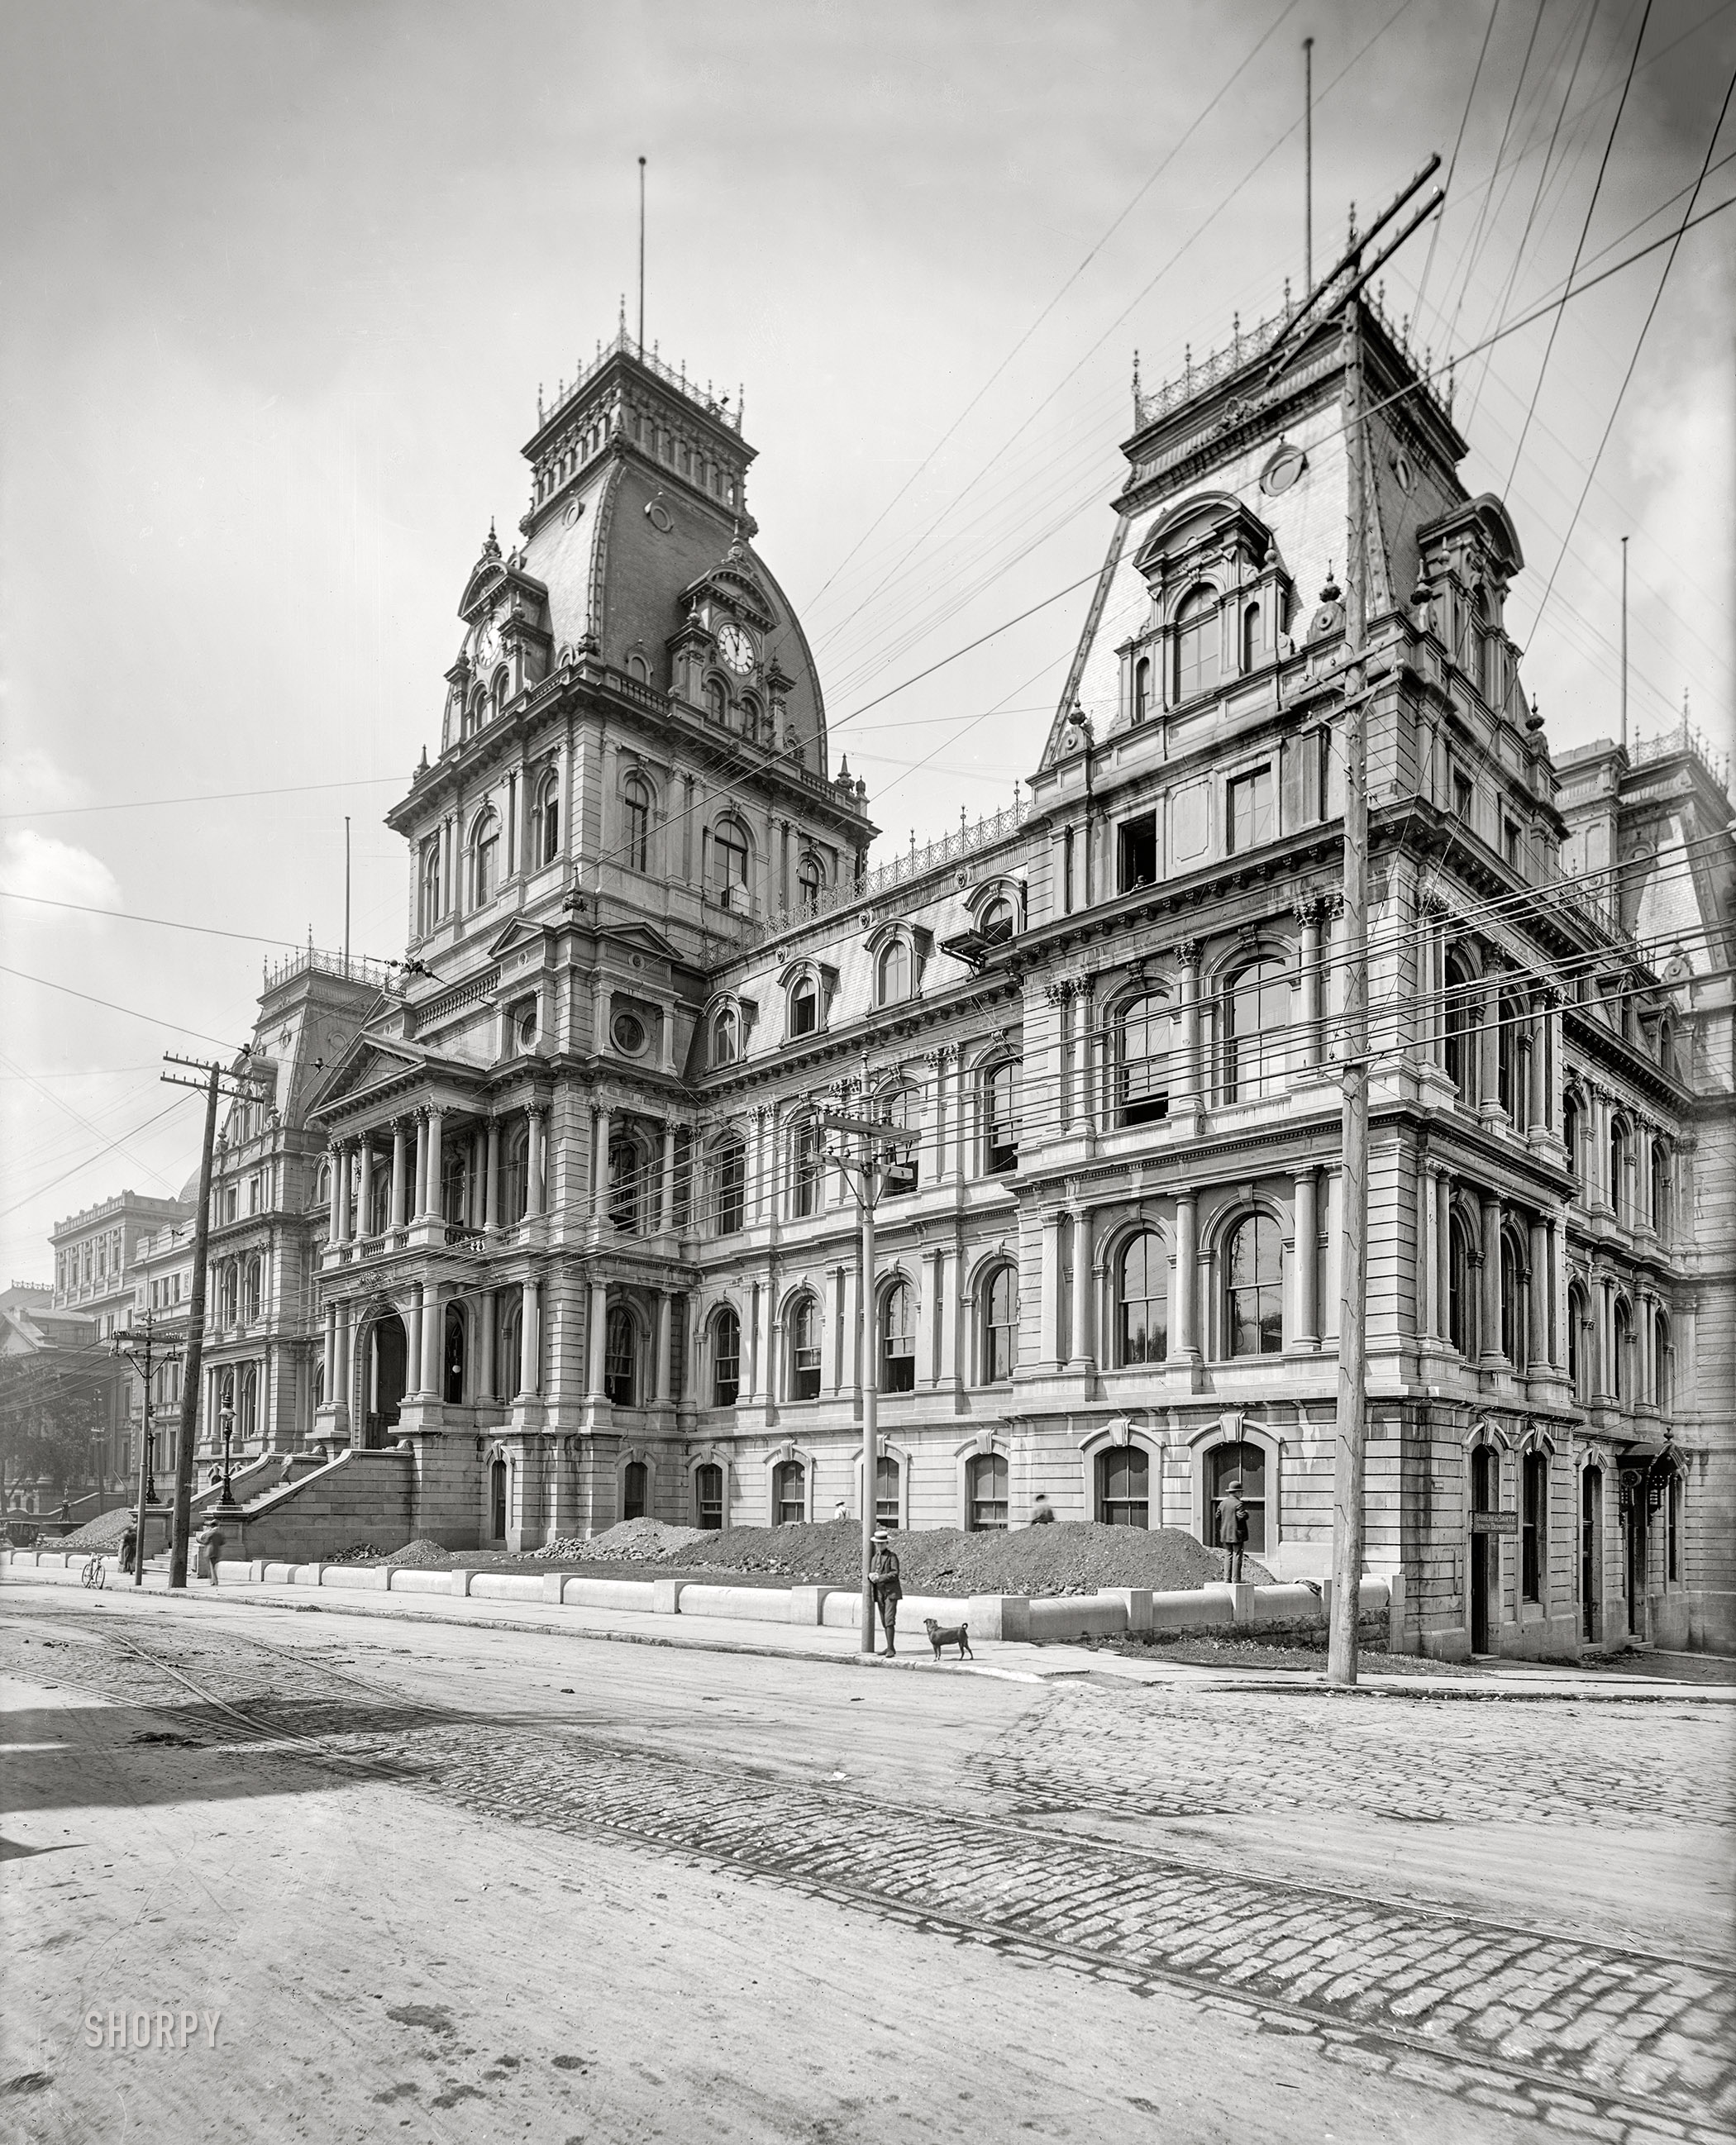 Circa 1900. "City Hall, Montreal, Quebec." Whose Second Empire facade received a Beaux-Arts makeover after a fire in 1922. 8x10 glass negative, Detroit Photographic Co. View full size.